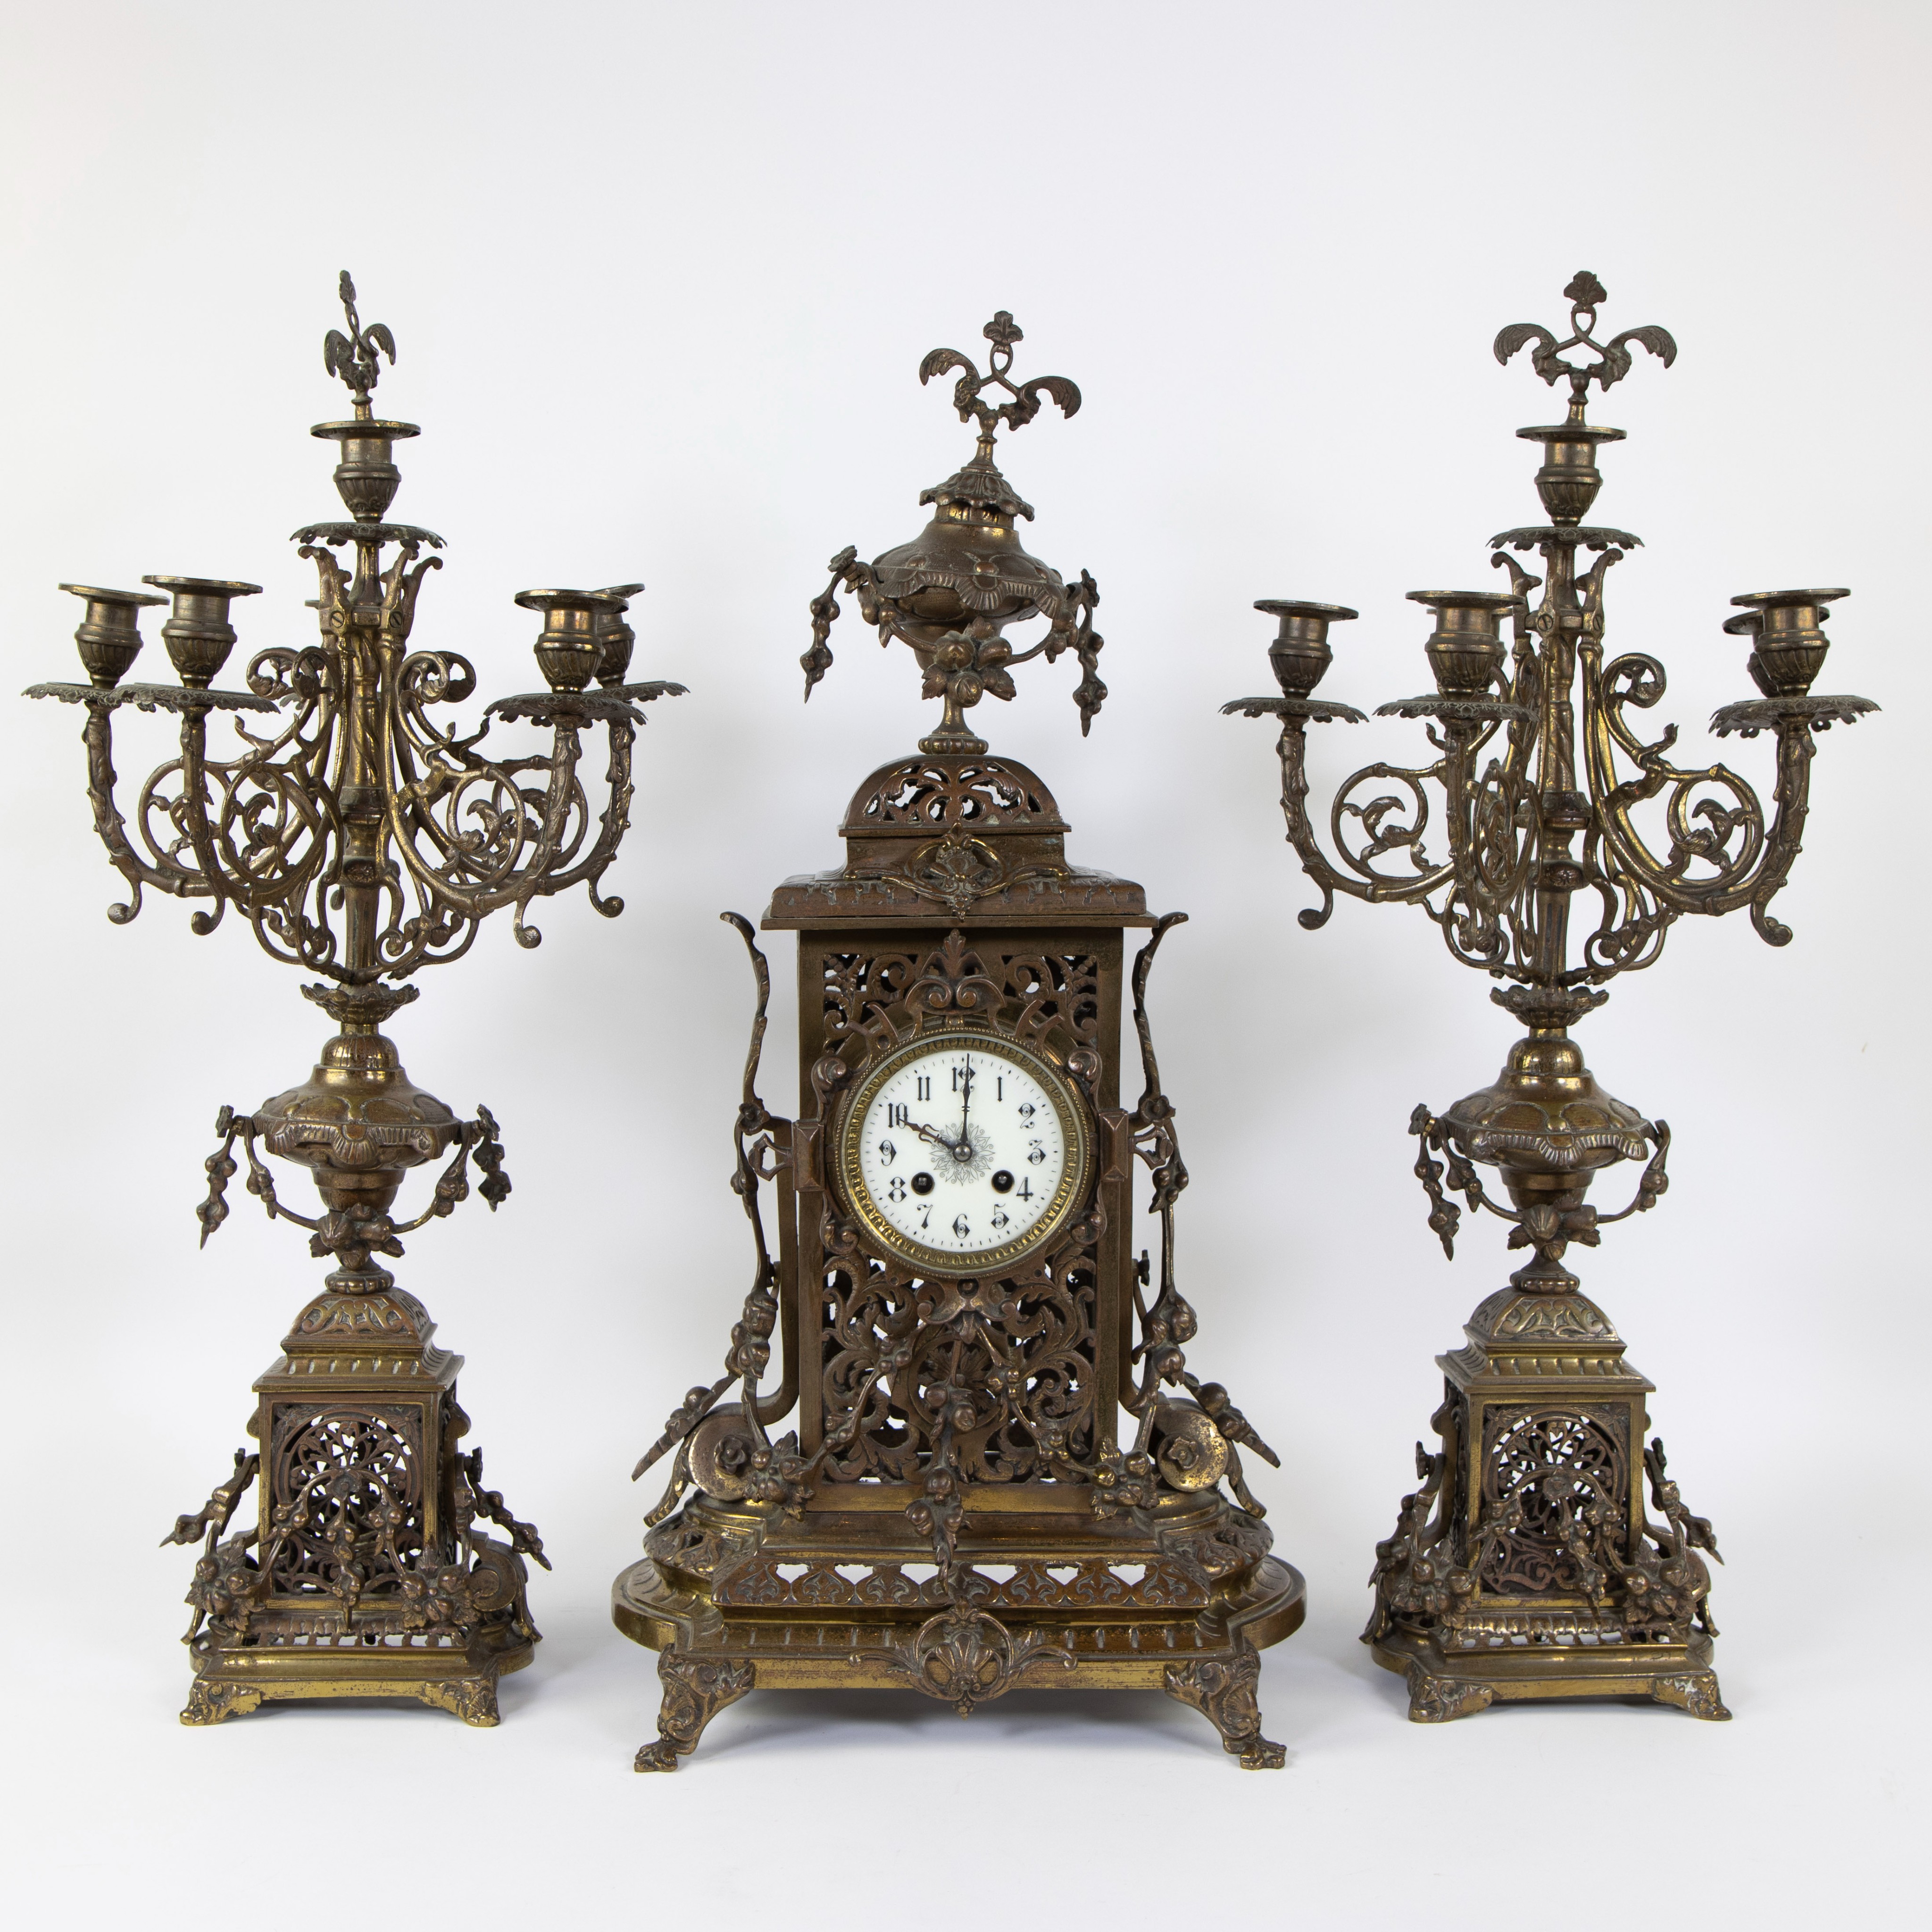 A Napoleon III style brass clock set comprising a mantel clock and two candlesticks.